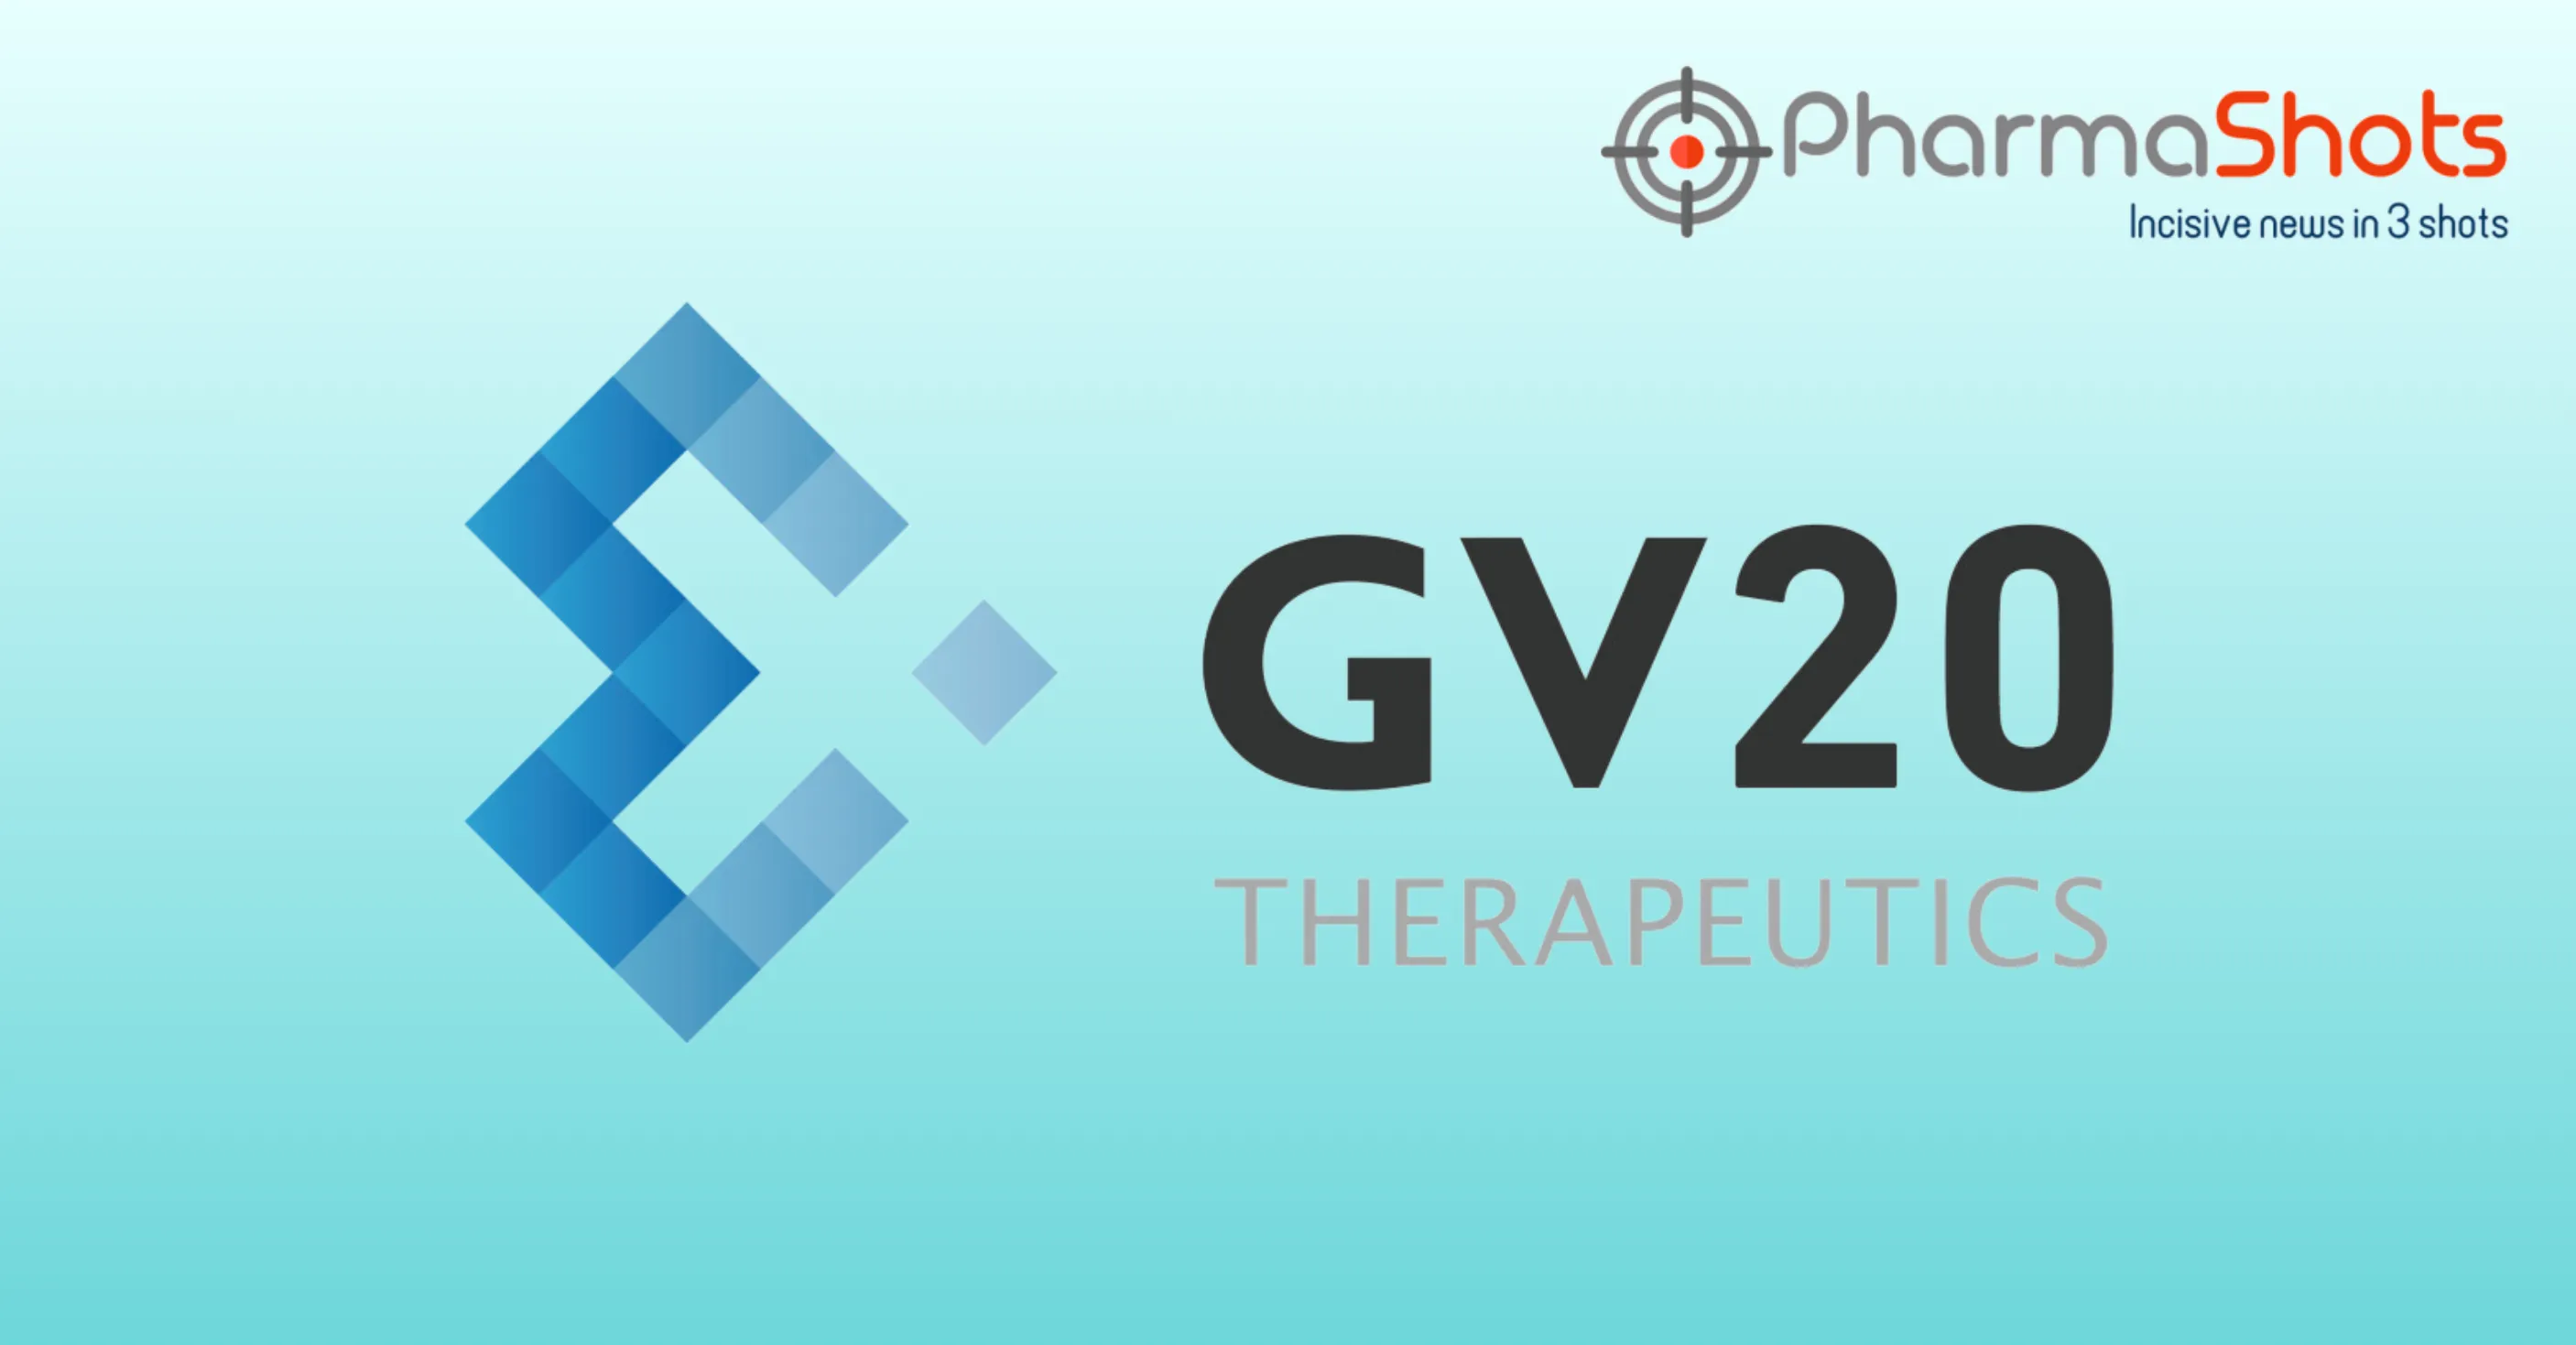 GV20 Therapeutics Collaborates with Merck to Evaluate GV20-0251 + KEYTRUDA in Patients with Advanced Solid Tumors